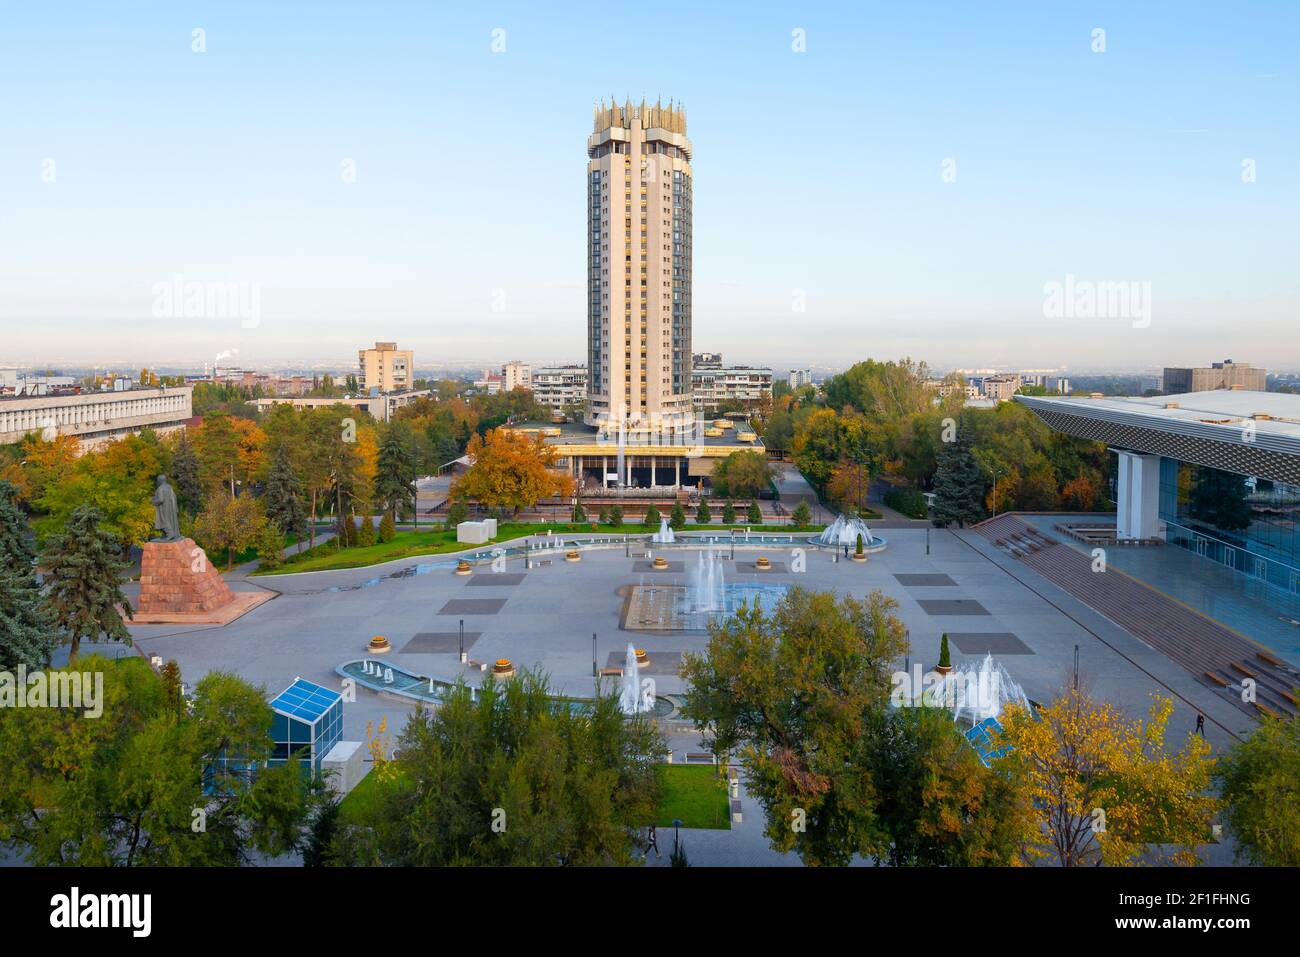 Kazakhstan Hotel tower in Abai Square, Almaty. Vegetation and water fountains in Abay Square in front of the Palace of the Republic. Stock Photo